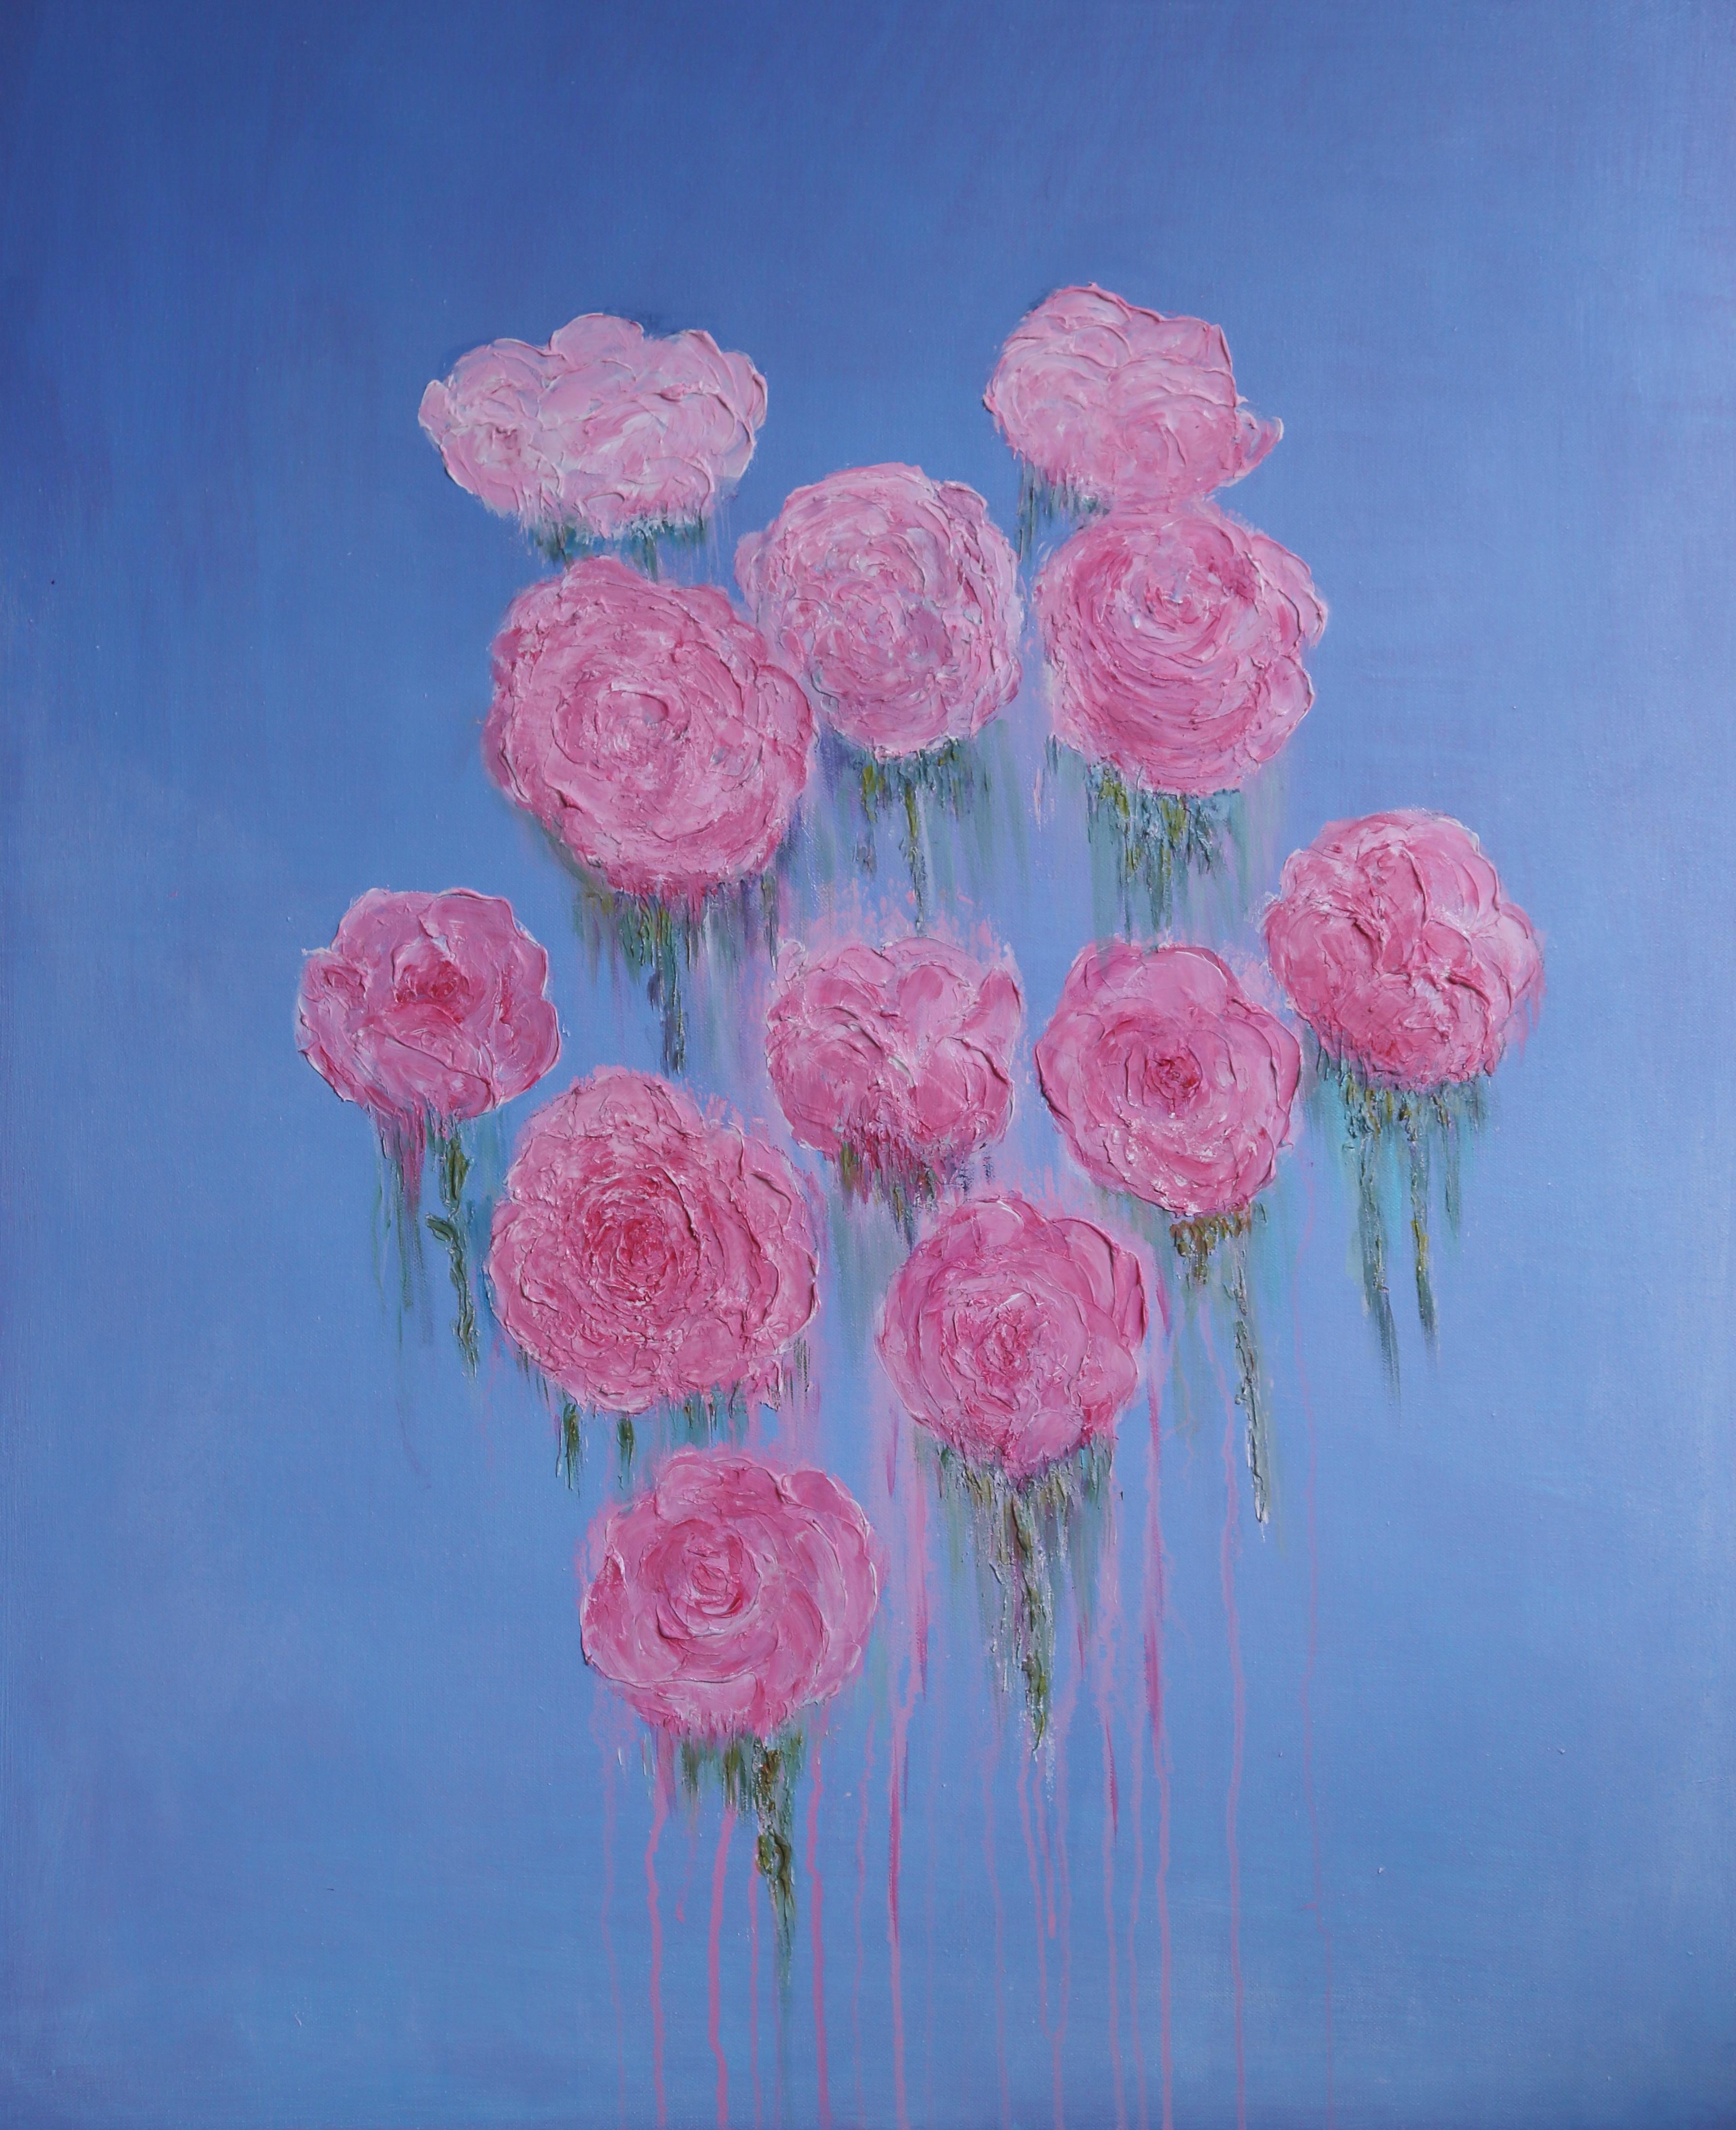 'Out of the Blue'
Acrylic and plaster paste on canvas
71x91 cm

First the canvas is primed with gesso, and several layers of the base coat are applied. When I am satisfied that there is enough depth to the colour, I start to sculpt the actual roses